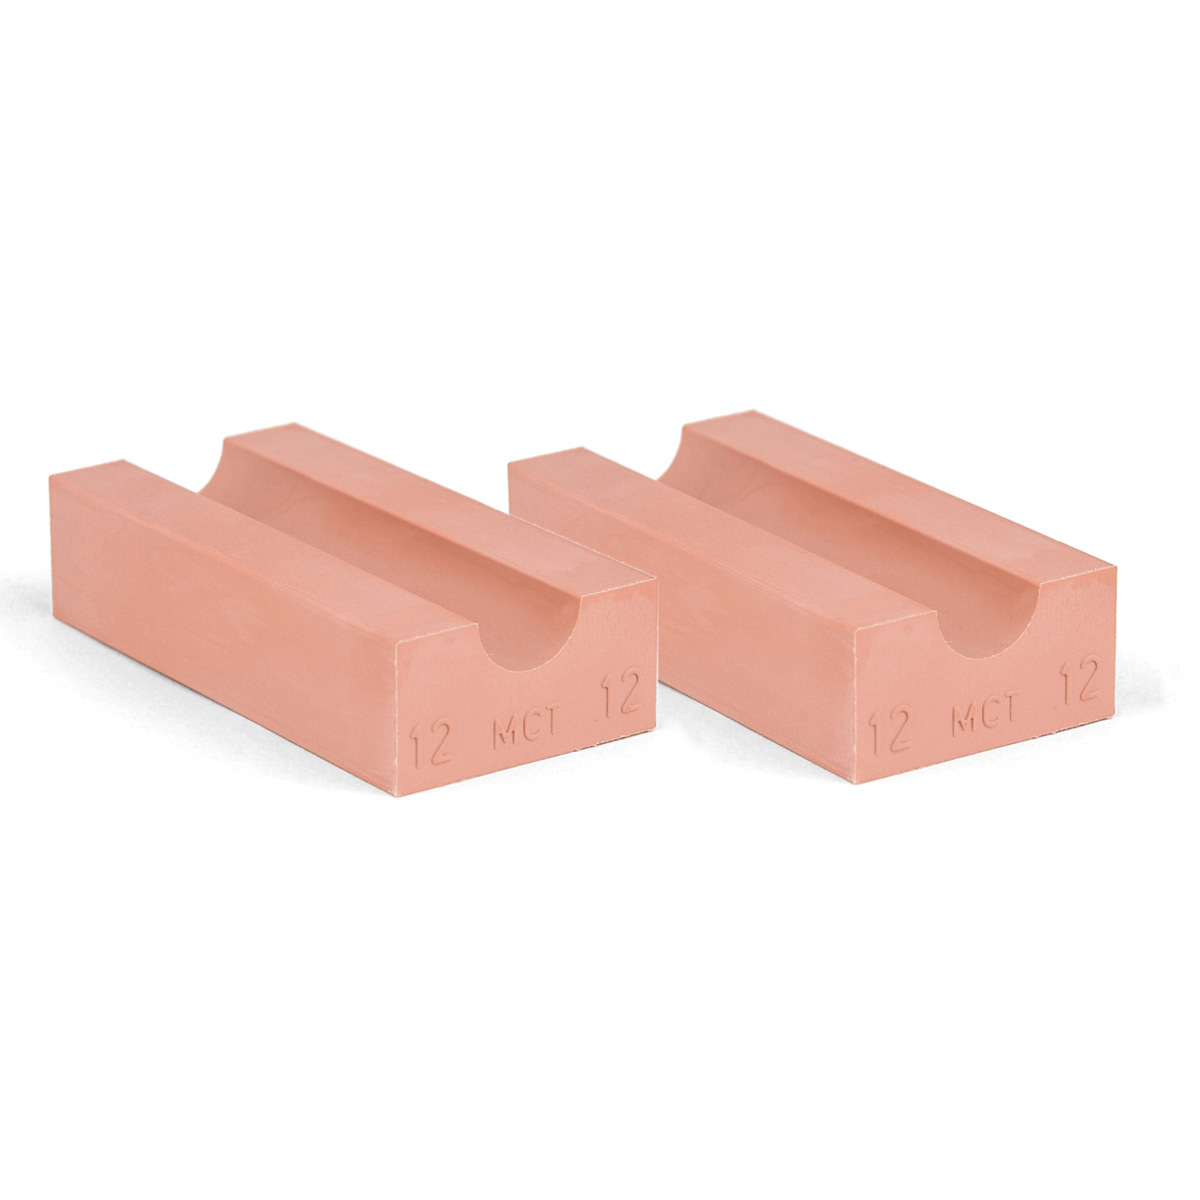 30-12*2 Set of 2 half insert block lycron, 30-12 for cable/pipe diam. 11.5-12.5mm